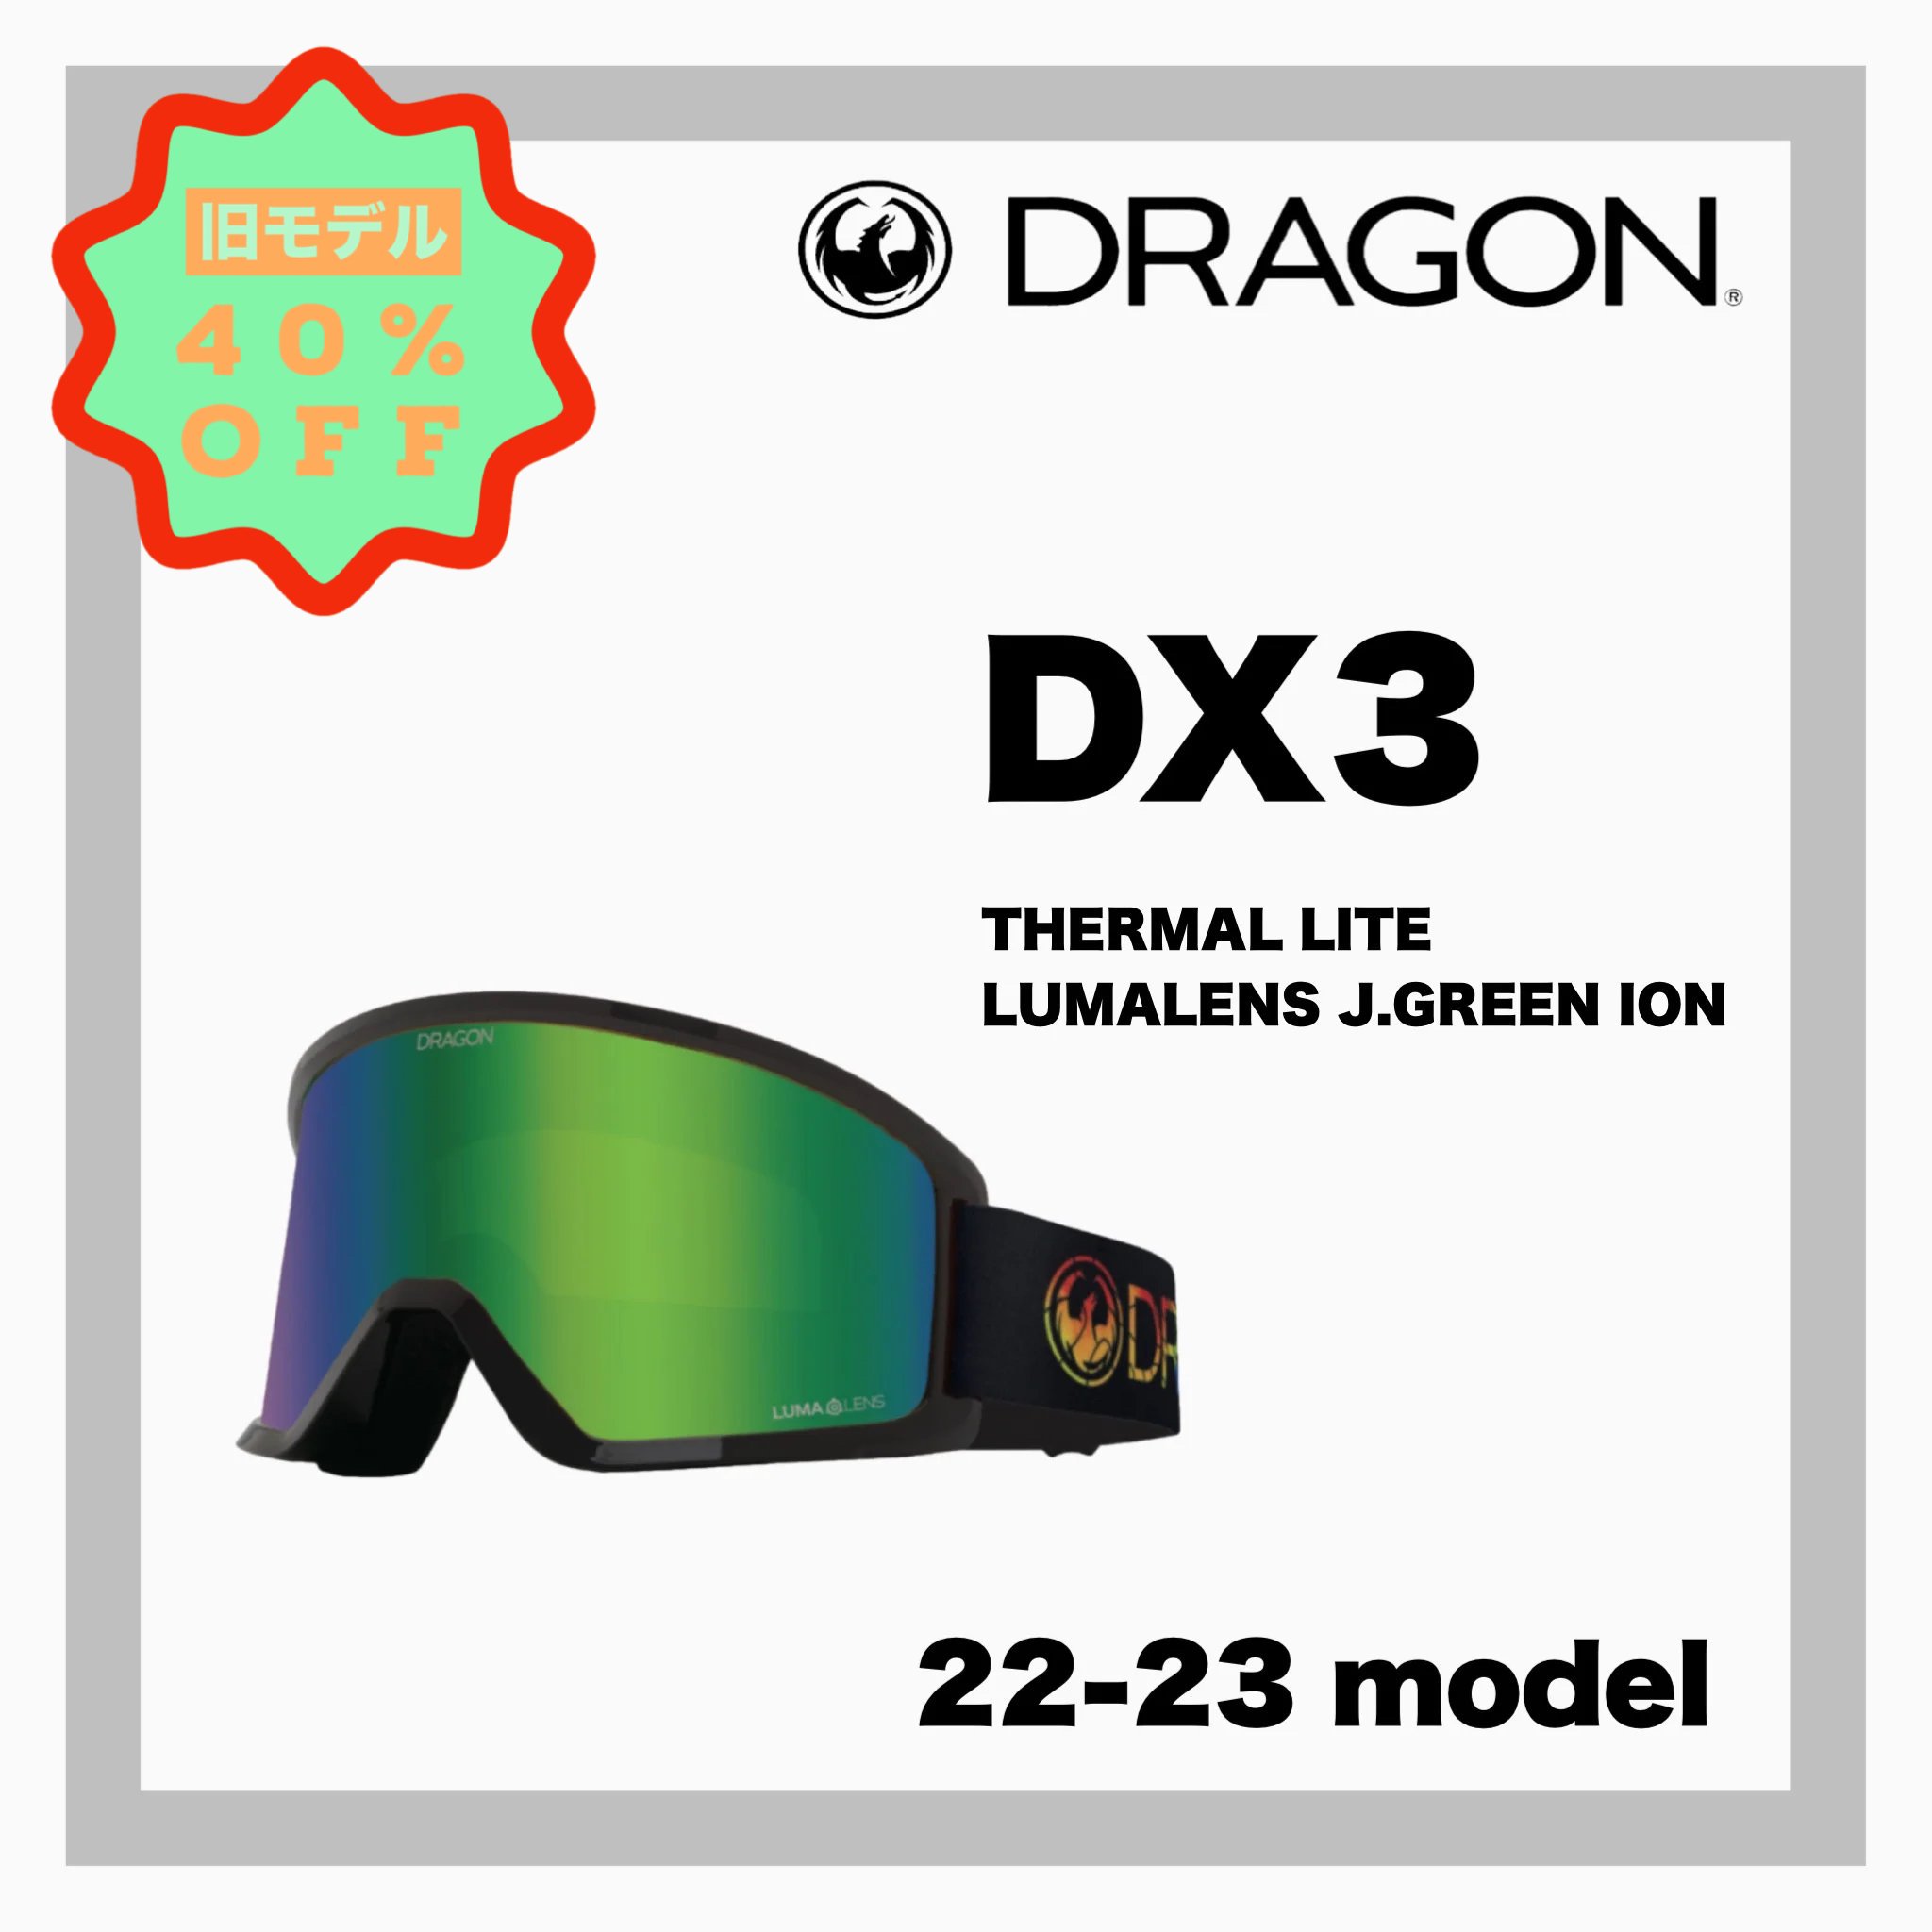 DRAGON 【DX3 -THERMAL LUMALENS J.GREEN ION】 - JOINT HOUSE